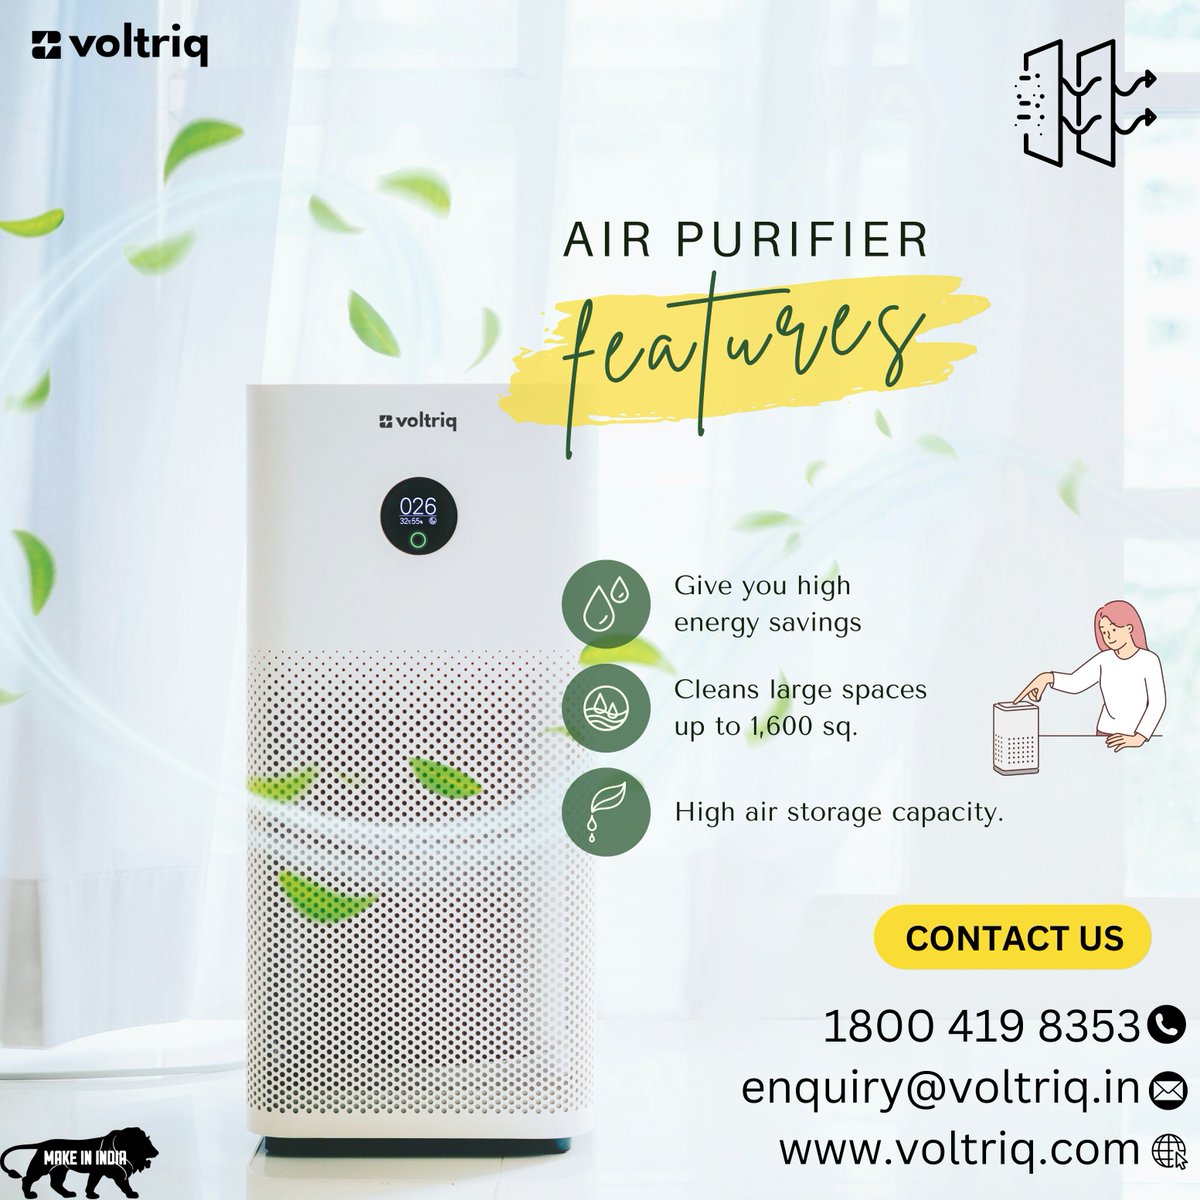 VOLTRIQ MAKE IN INDIA

'Make In India Air Purifier

all around air intake from all sides of air purifier'

#voltriq #voltriqindia #GeMIndia #Gemportal #gemdealer #manufacturer #supplier #dealer #business #news #makeinindia
 #airpurifier #airpollution  #cleanair
#aircleaner